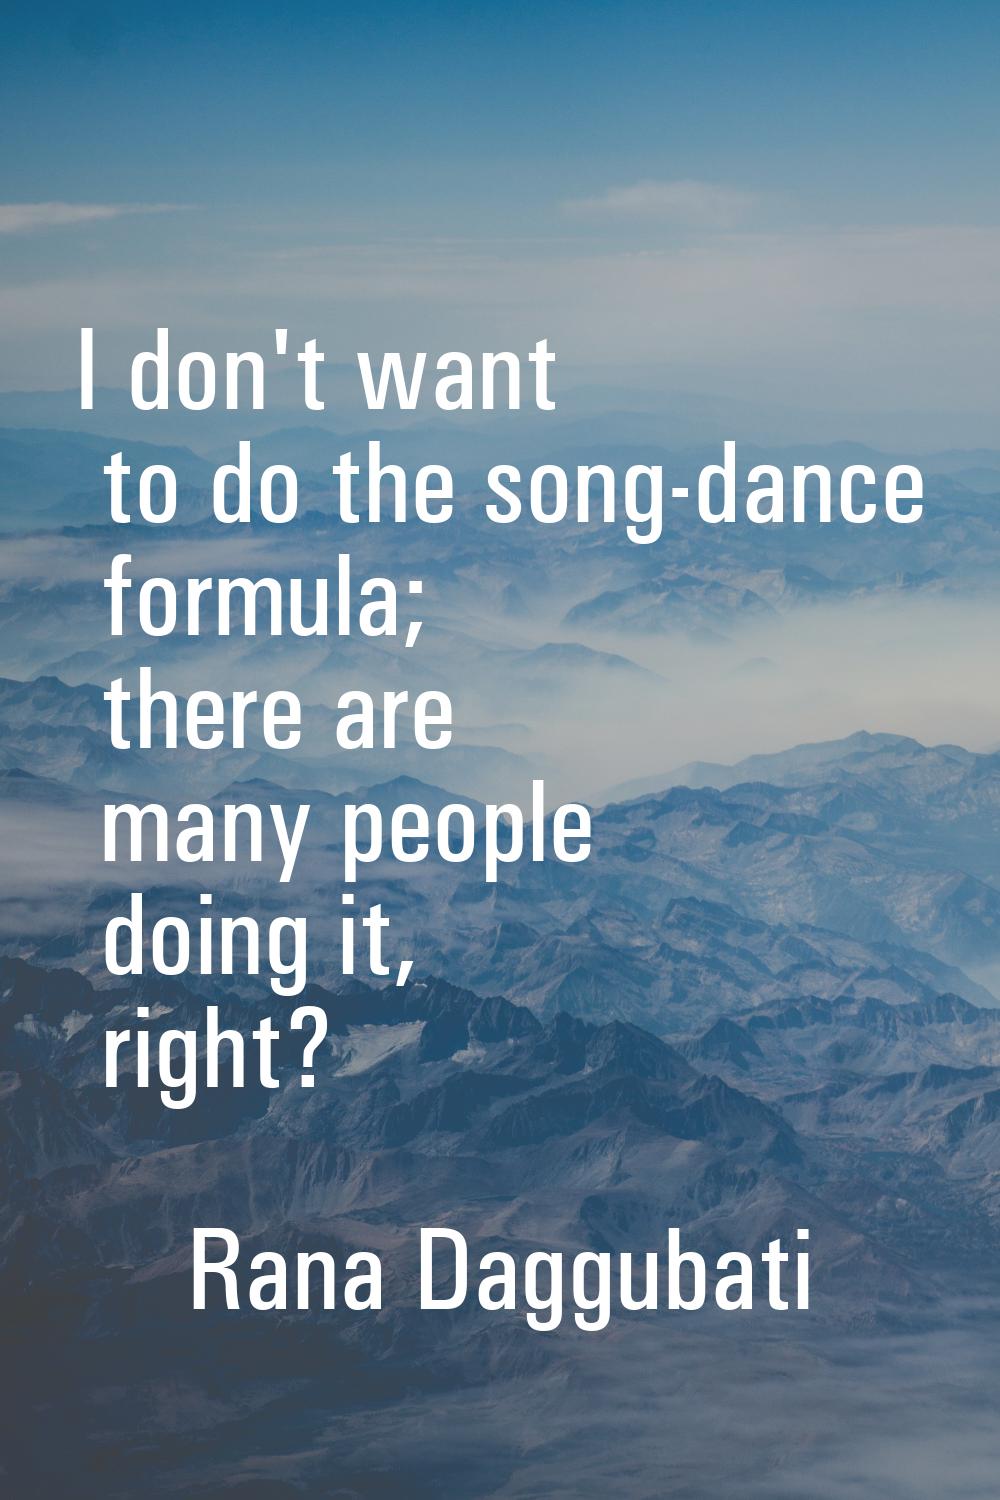 I don't want to do the song-dance formula; there are many people doing it, right?